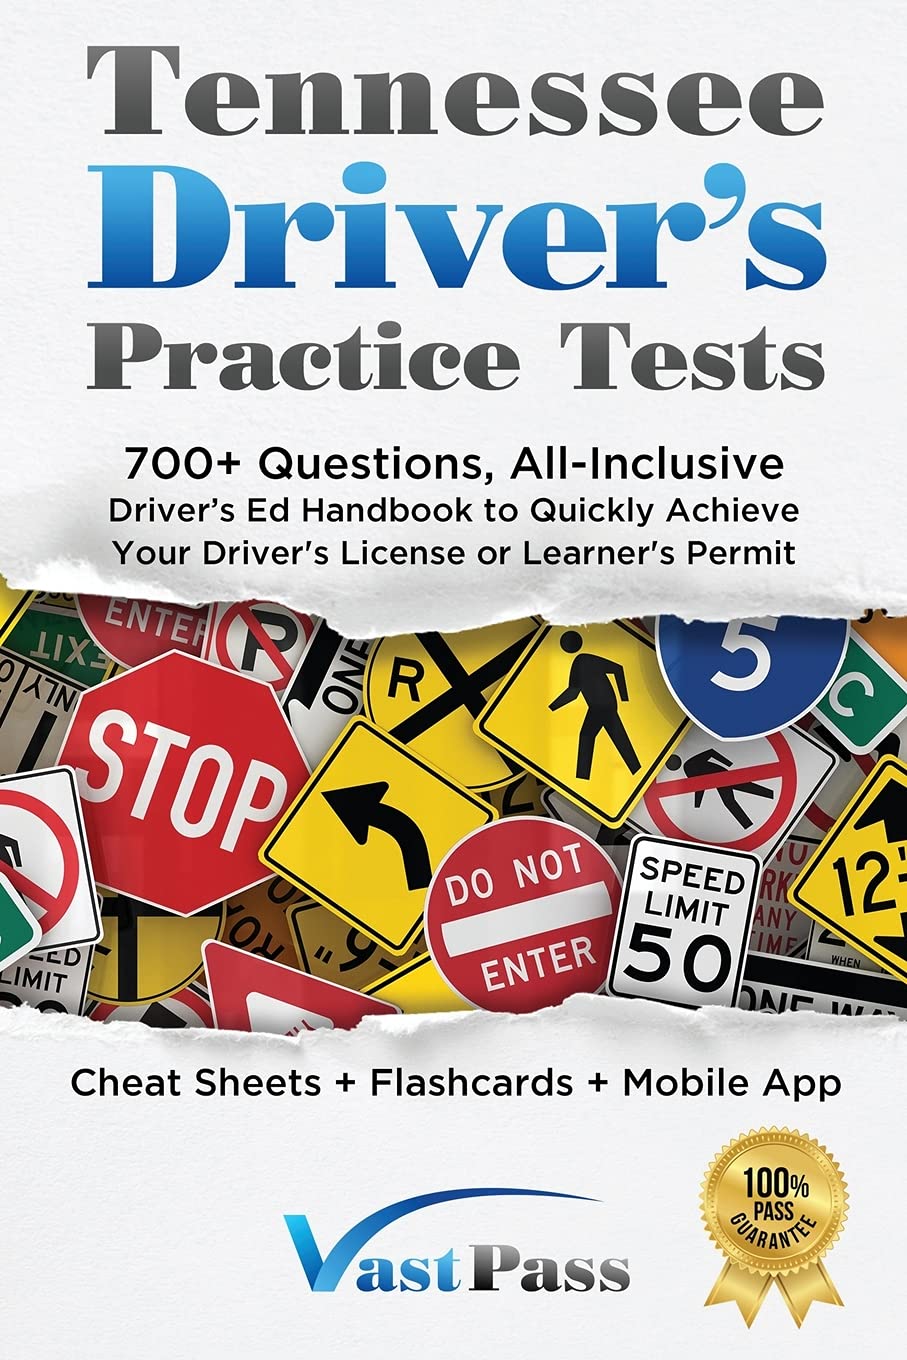 Tennessee Driver's Practice Tests - SureShot Books Publishing LLC